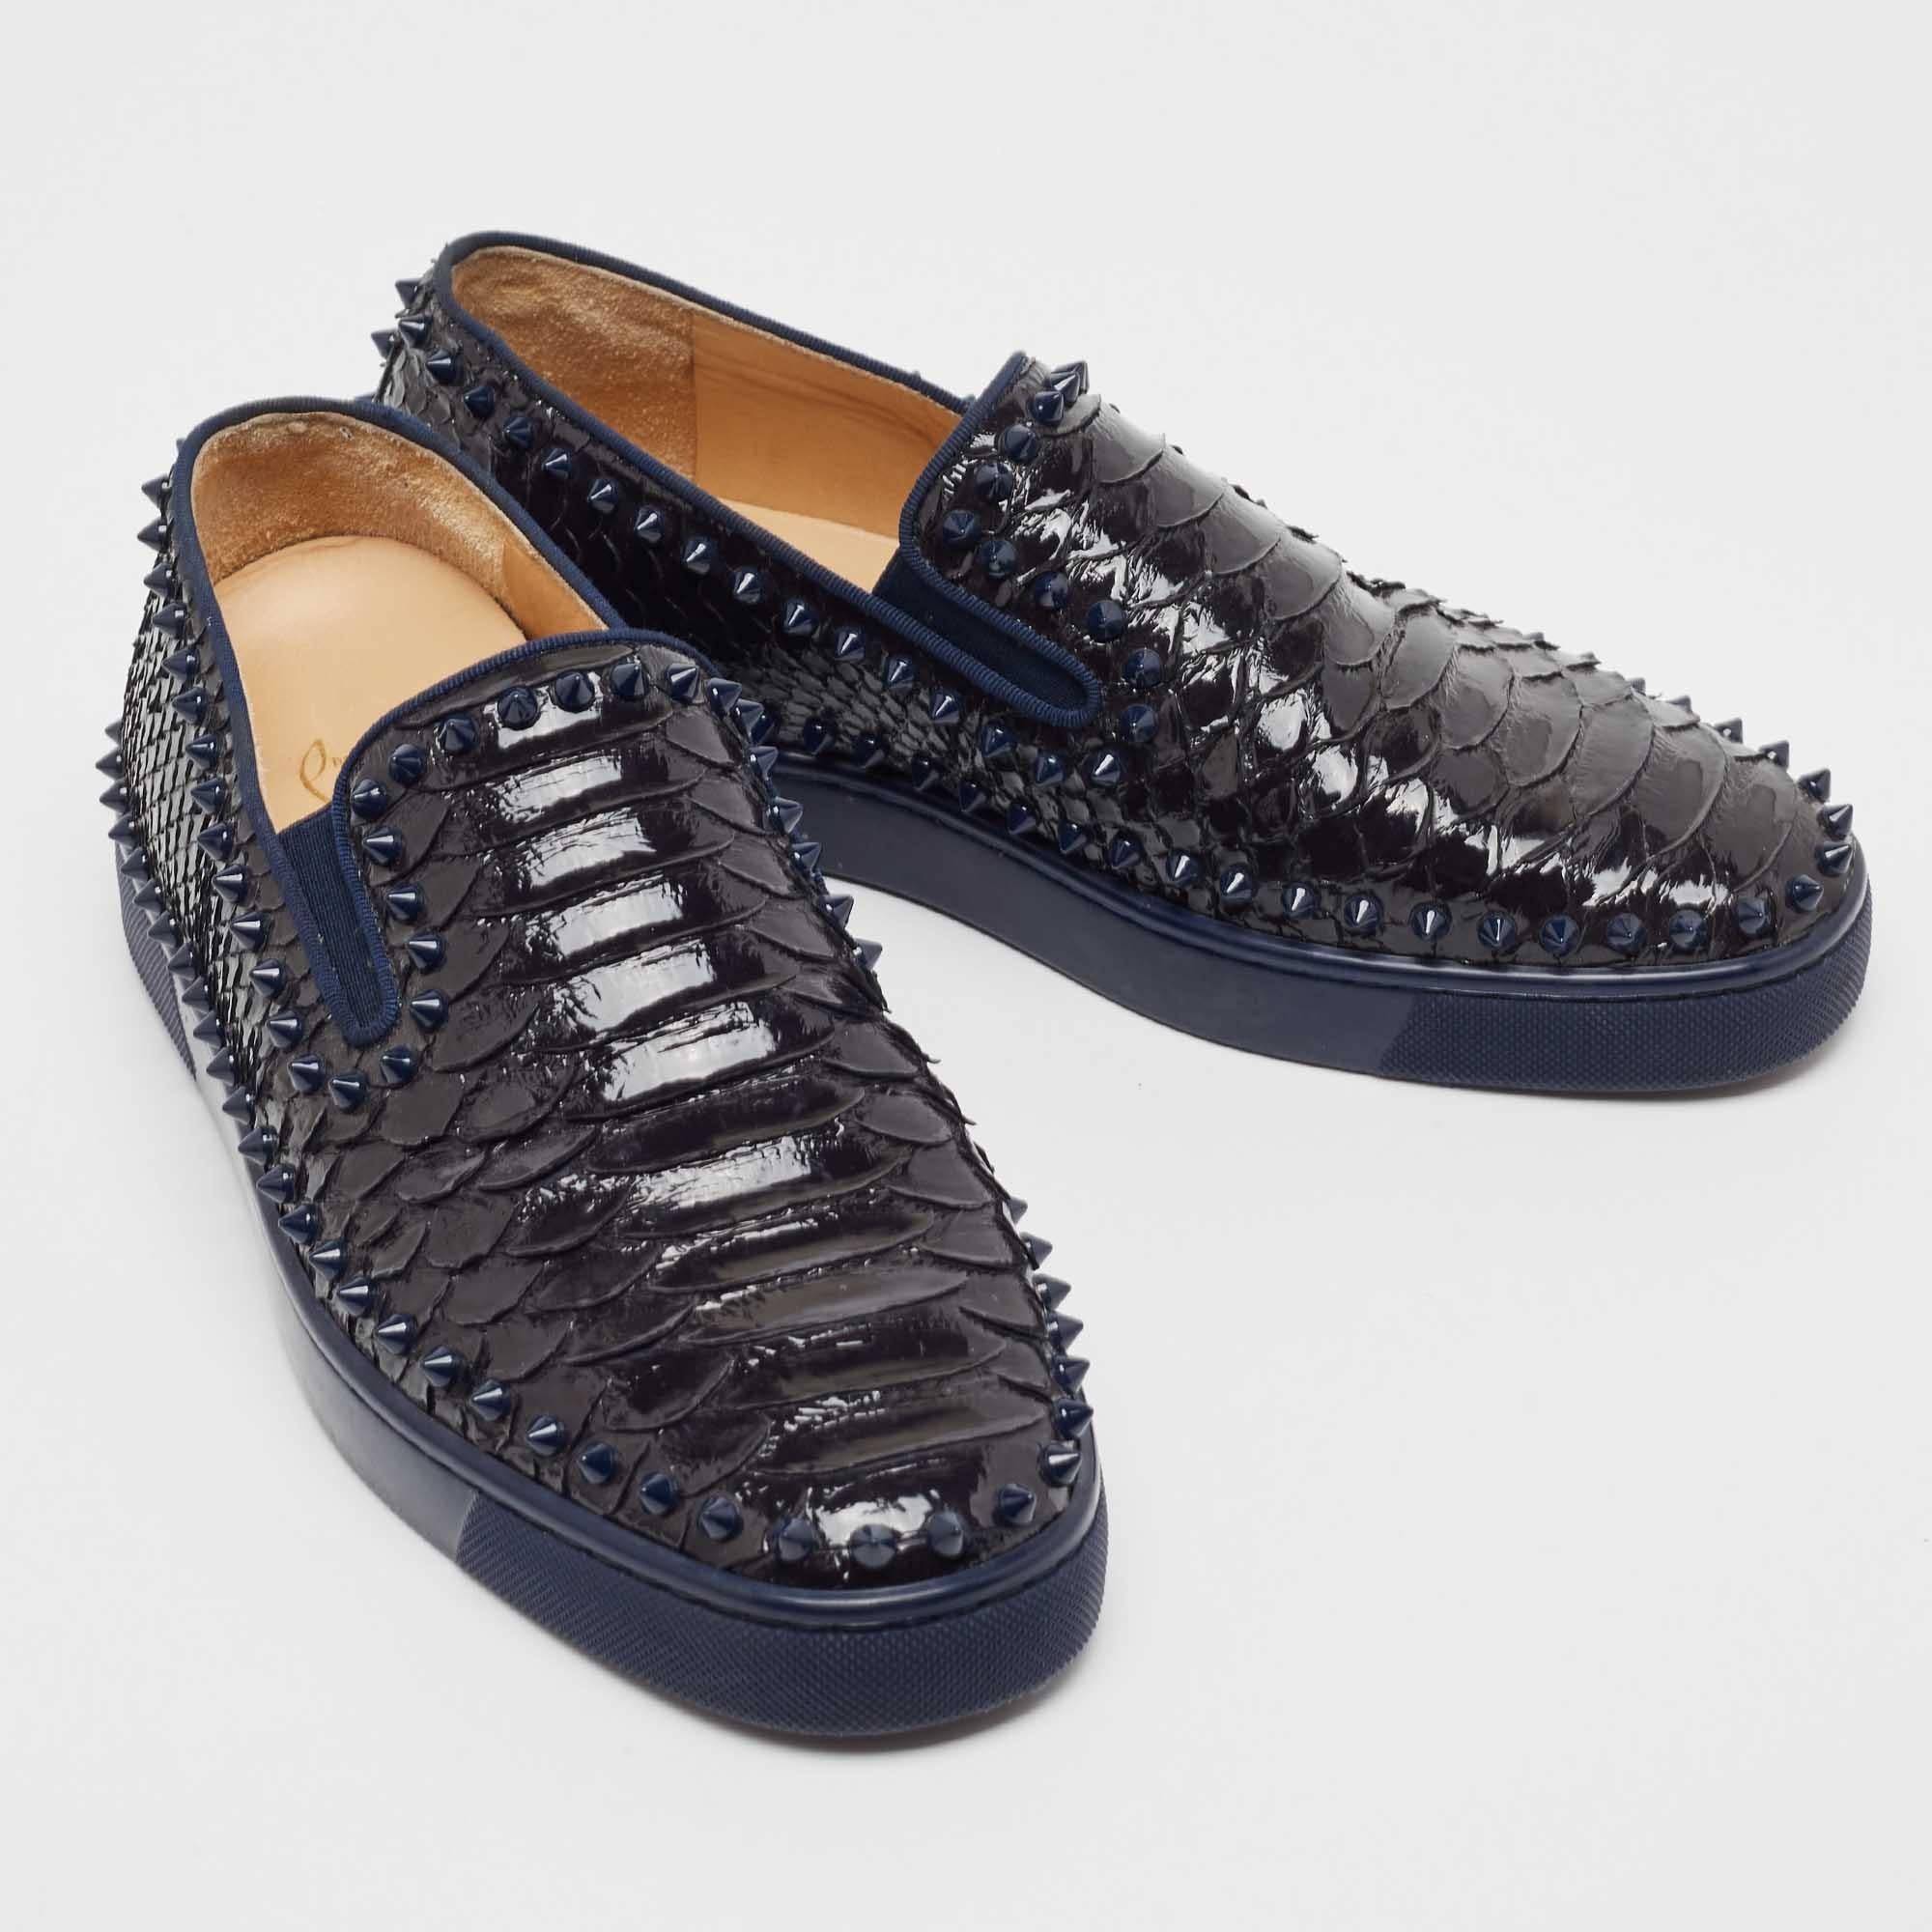 Christian Louboutin Black/Navy Blue Python Spike Pik Boat Sneakers Size 41.5 In Good Condition For Sale In Dubai, Al Qouz 2